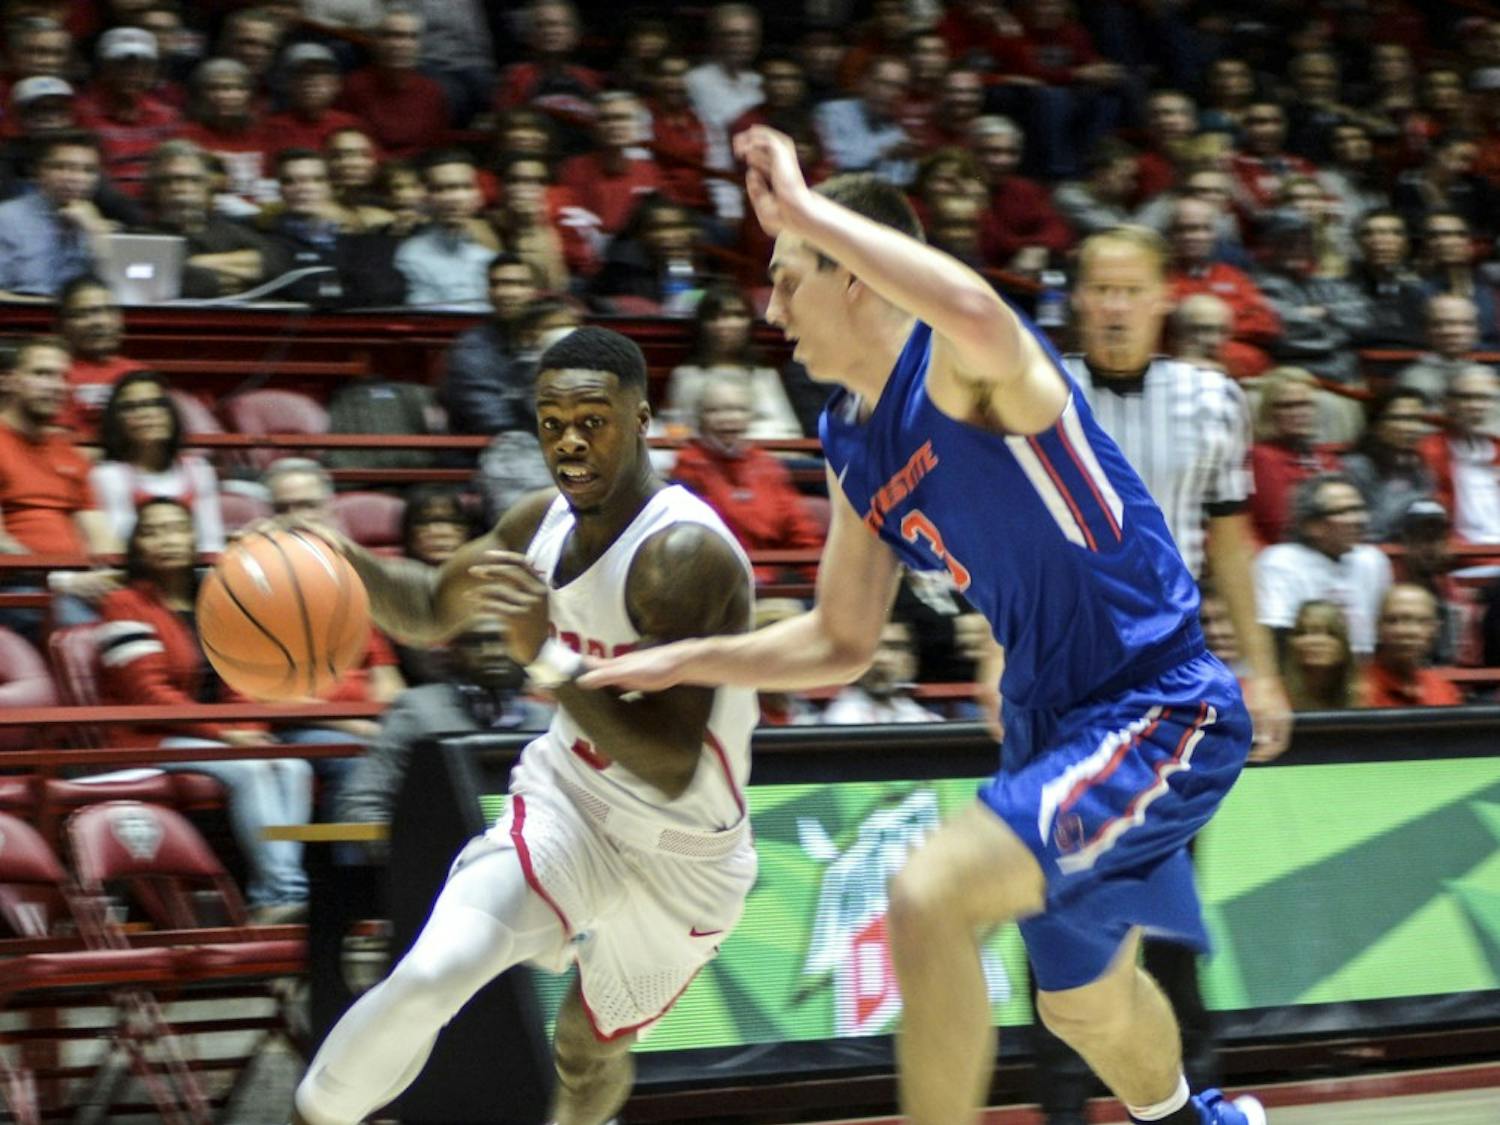 Antino Jackson of New Mexico drives against Justinian Jessup, No. 3, of Boise State during the second half of Tuesday night's game at Dreamstyle Arena. The Lobos gave up a late lead and lost 73-71.
